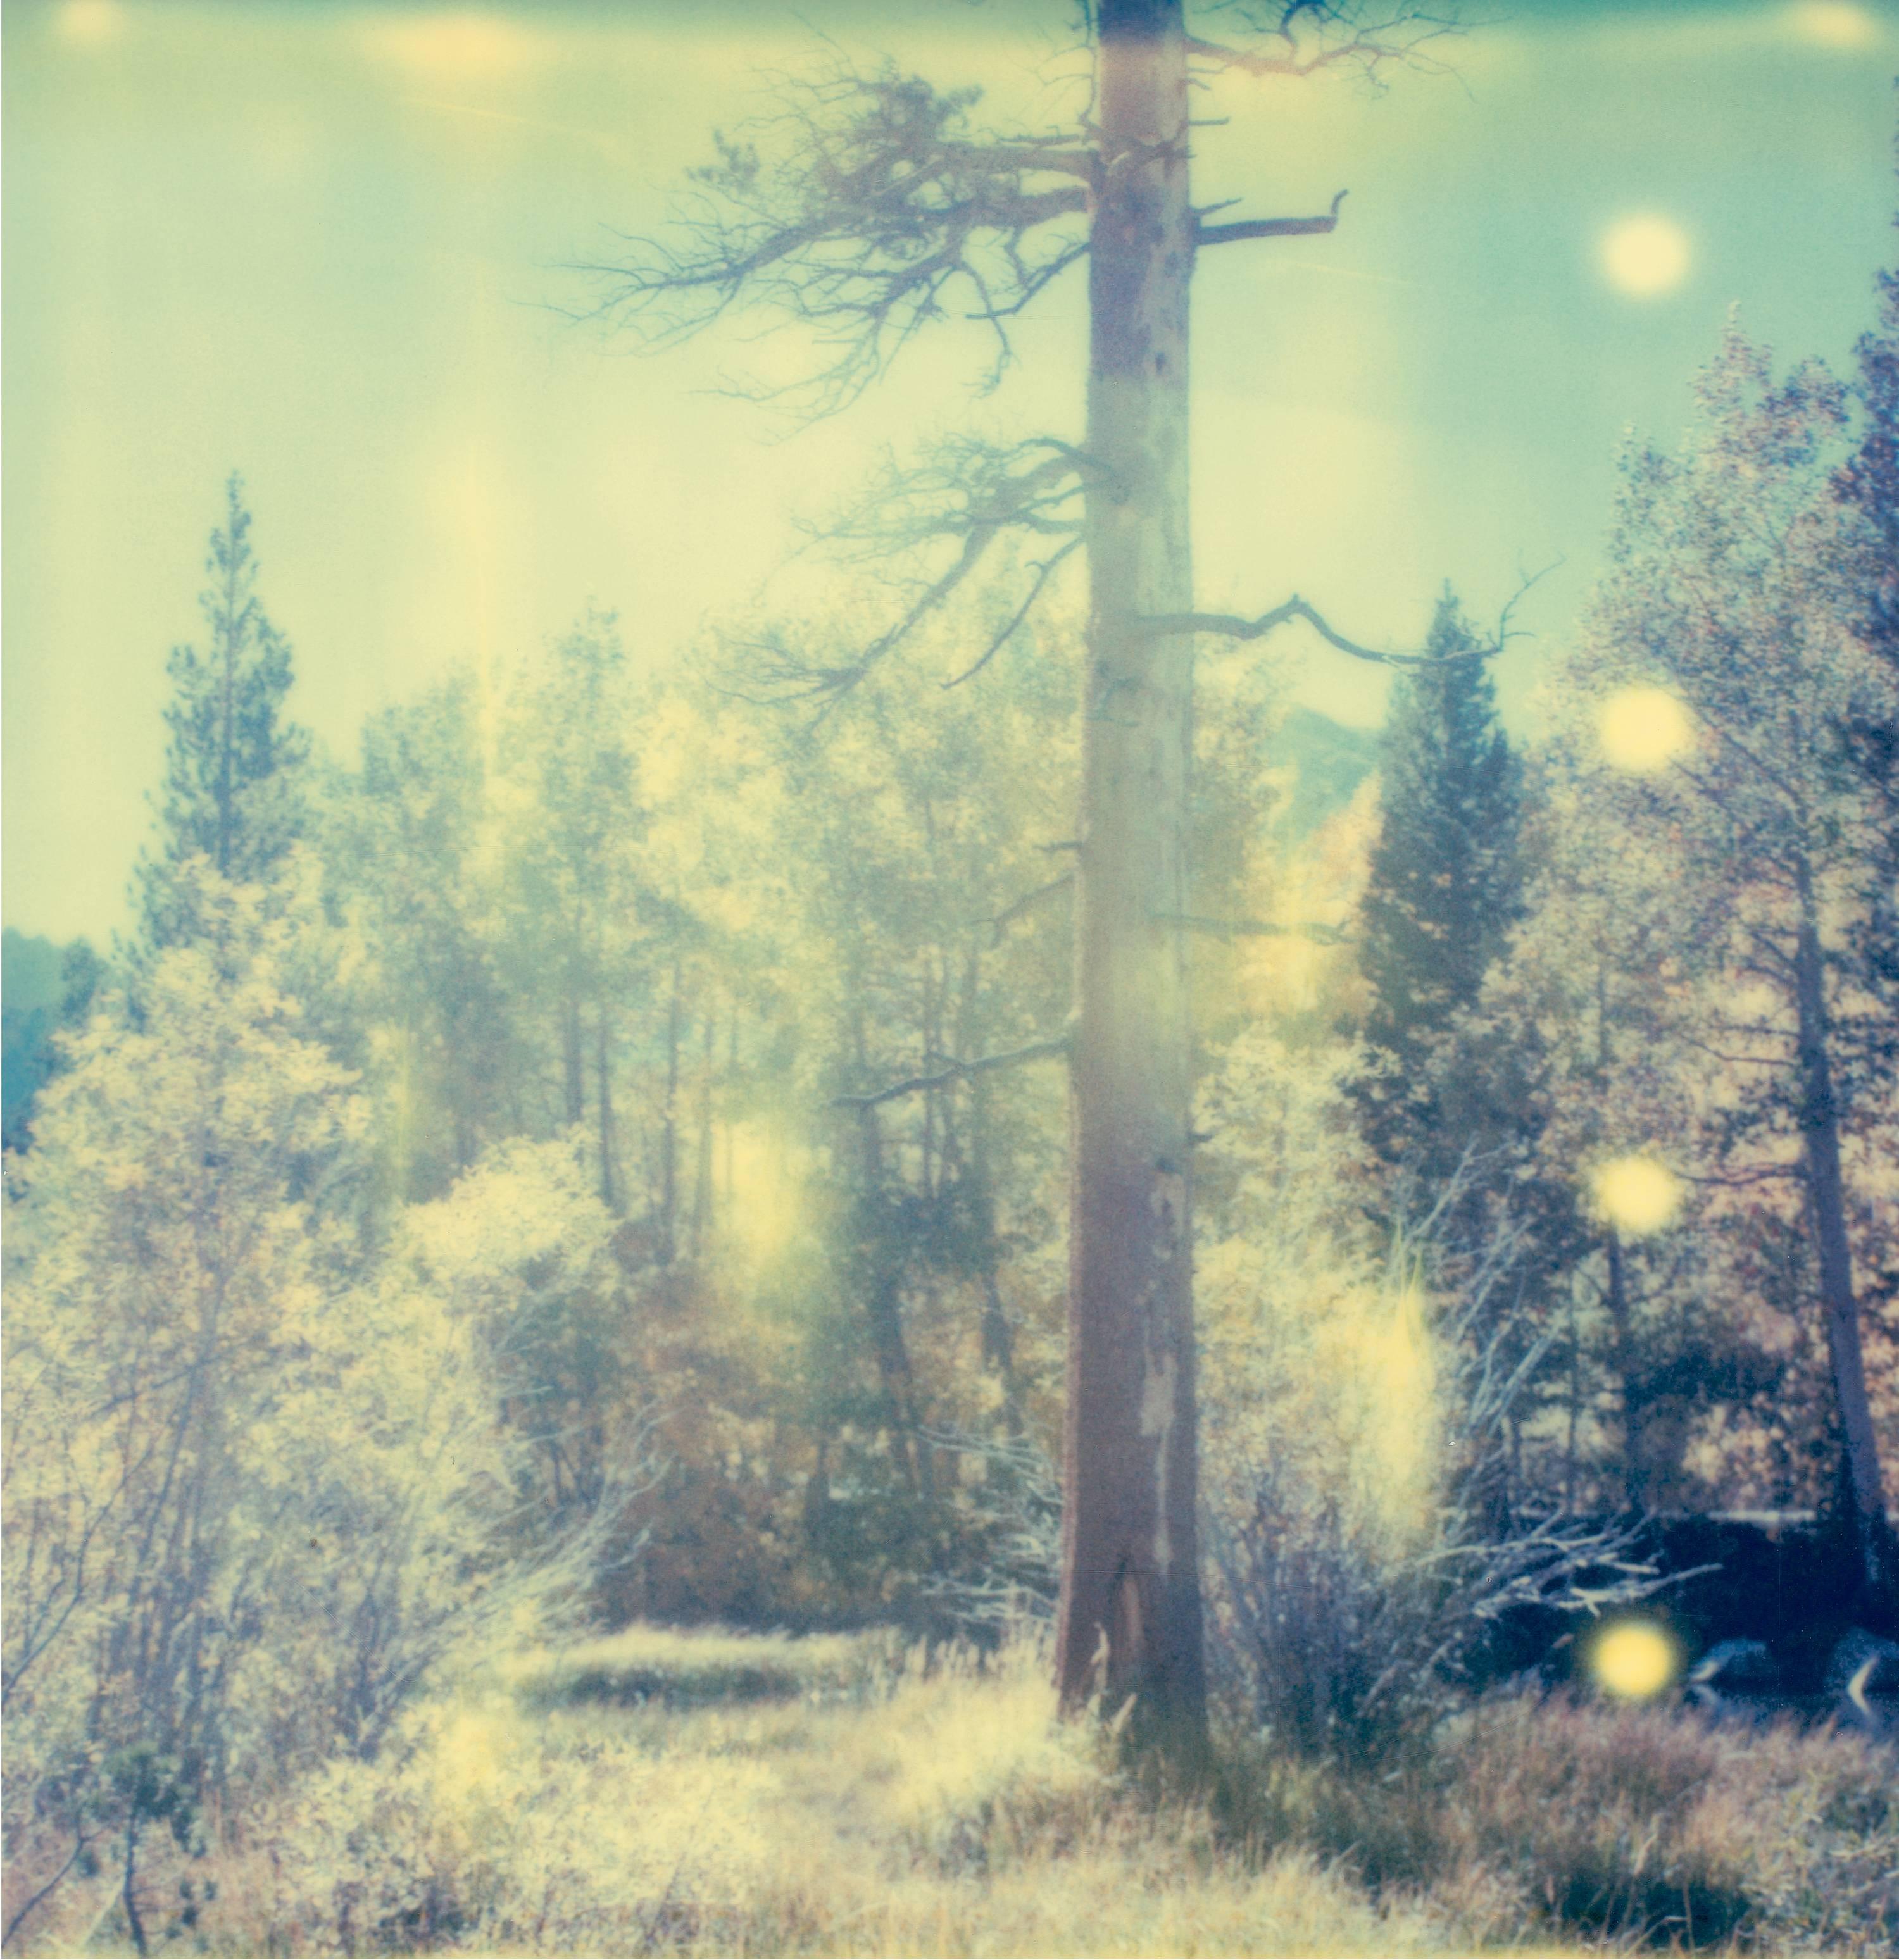 Stefanie Schneider Color Photograph - In the Range of Light (Wastelands) - Polaroid, Contemporary, 21st Century, Color